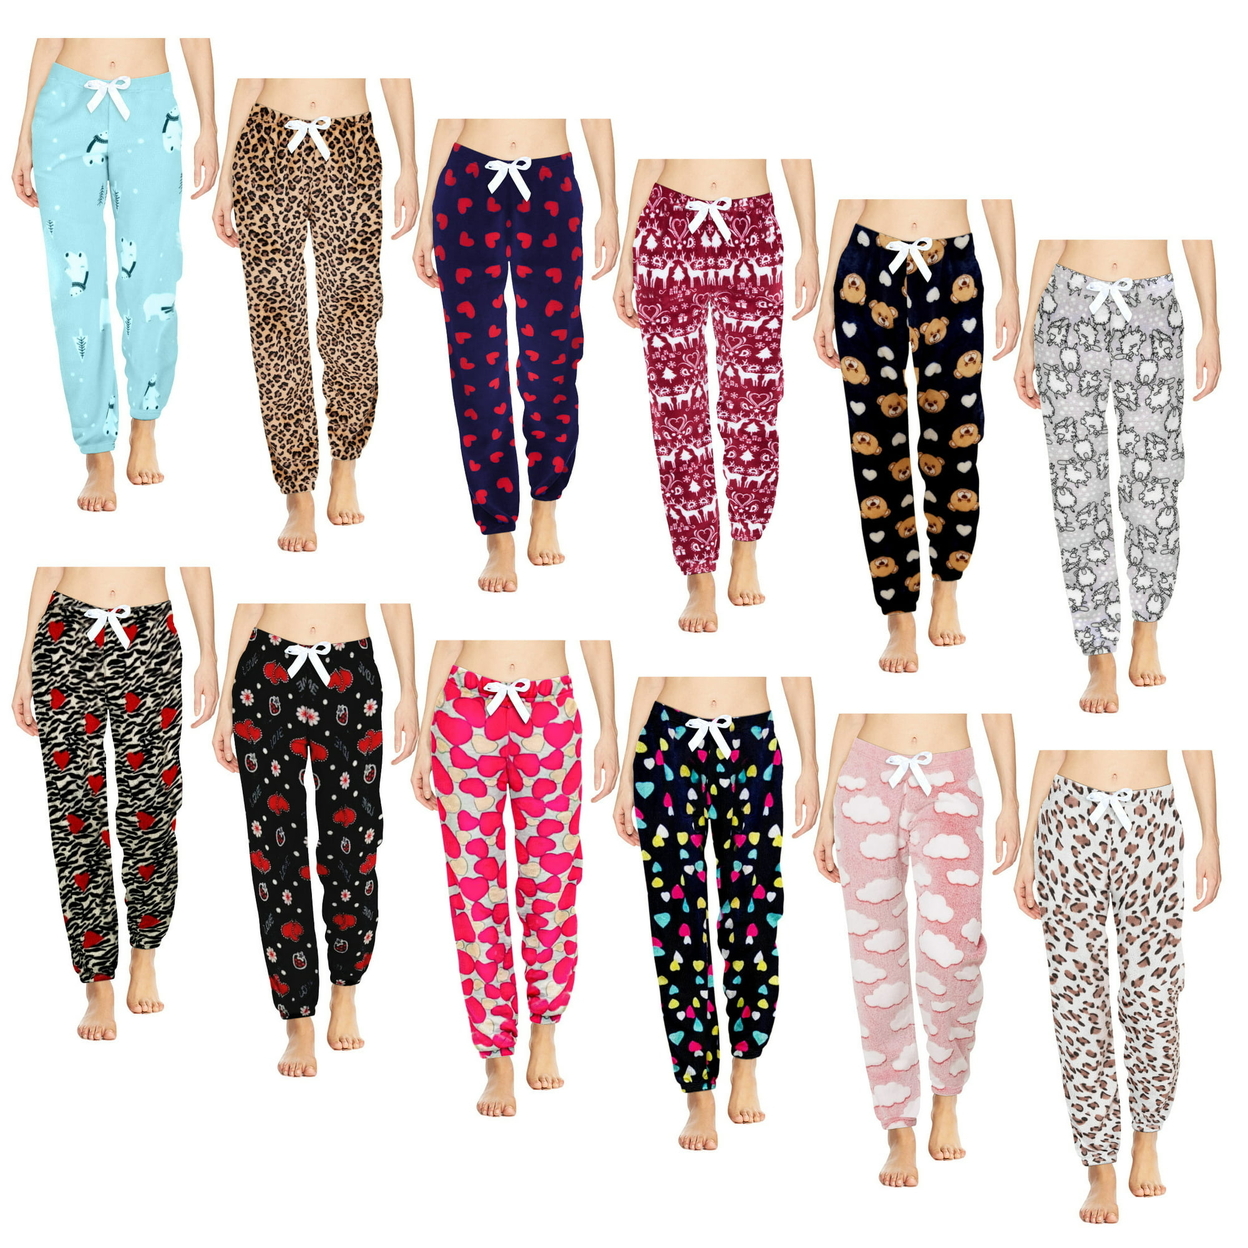 3-Pack: Women's Printed Ultra-Soft Comfy Stretch Micro-Fleece Pajama Lounge Pants - Large, Shapes